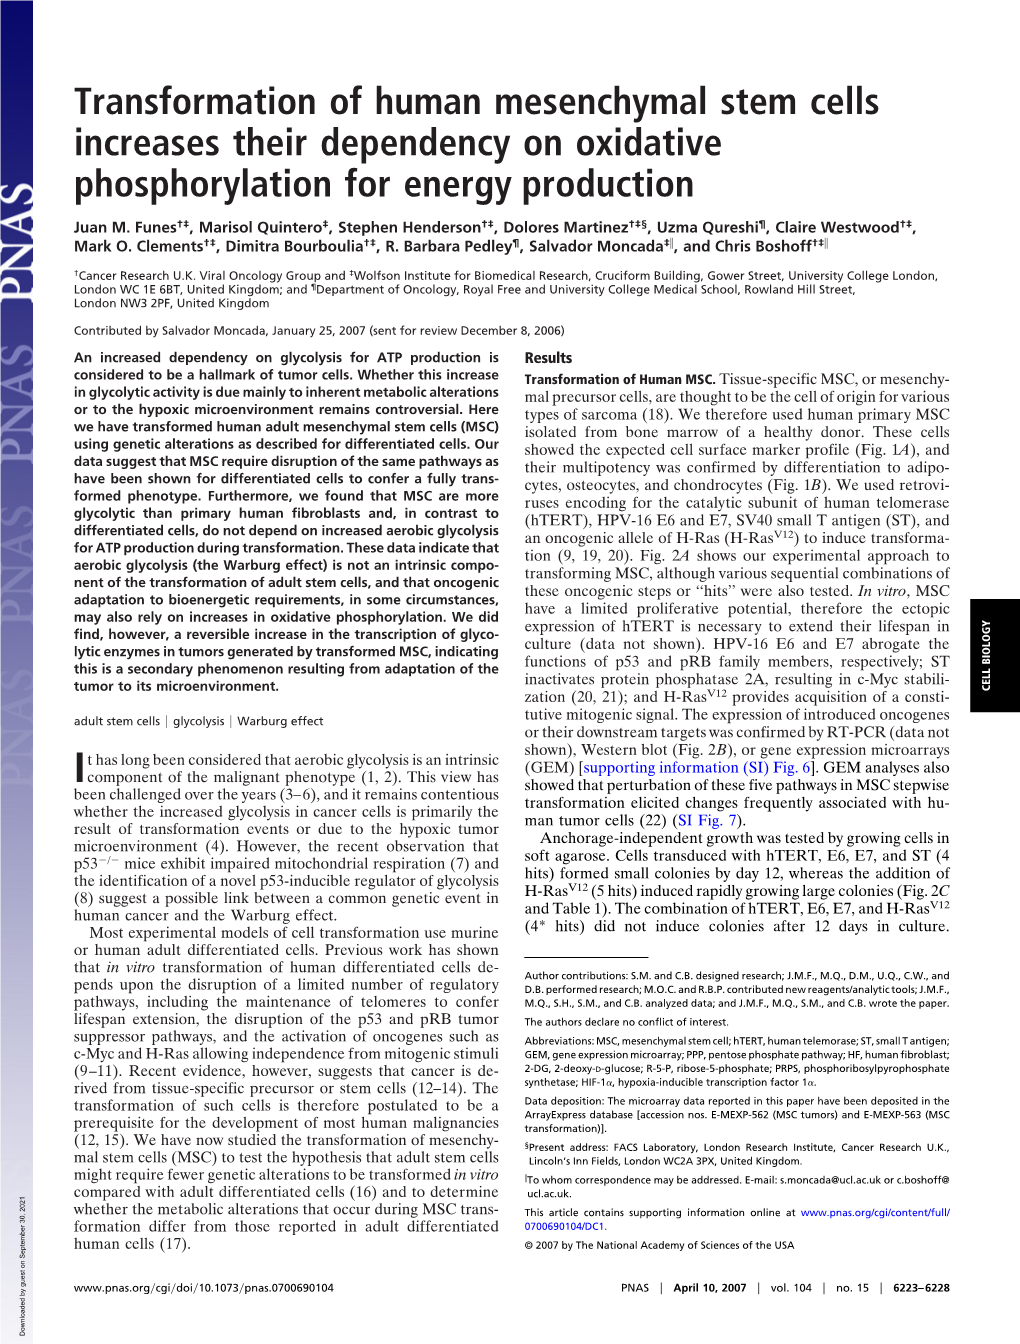 Transformation of Human Mesenchymal Stem Cells Increases Their Dependency on Oxidative Phosphorylation for Energy Production